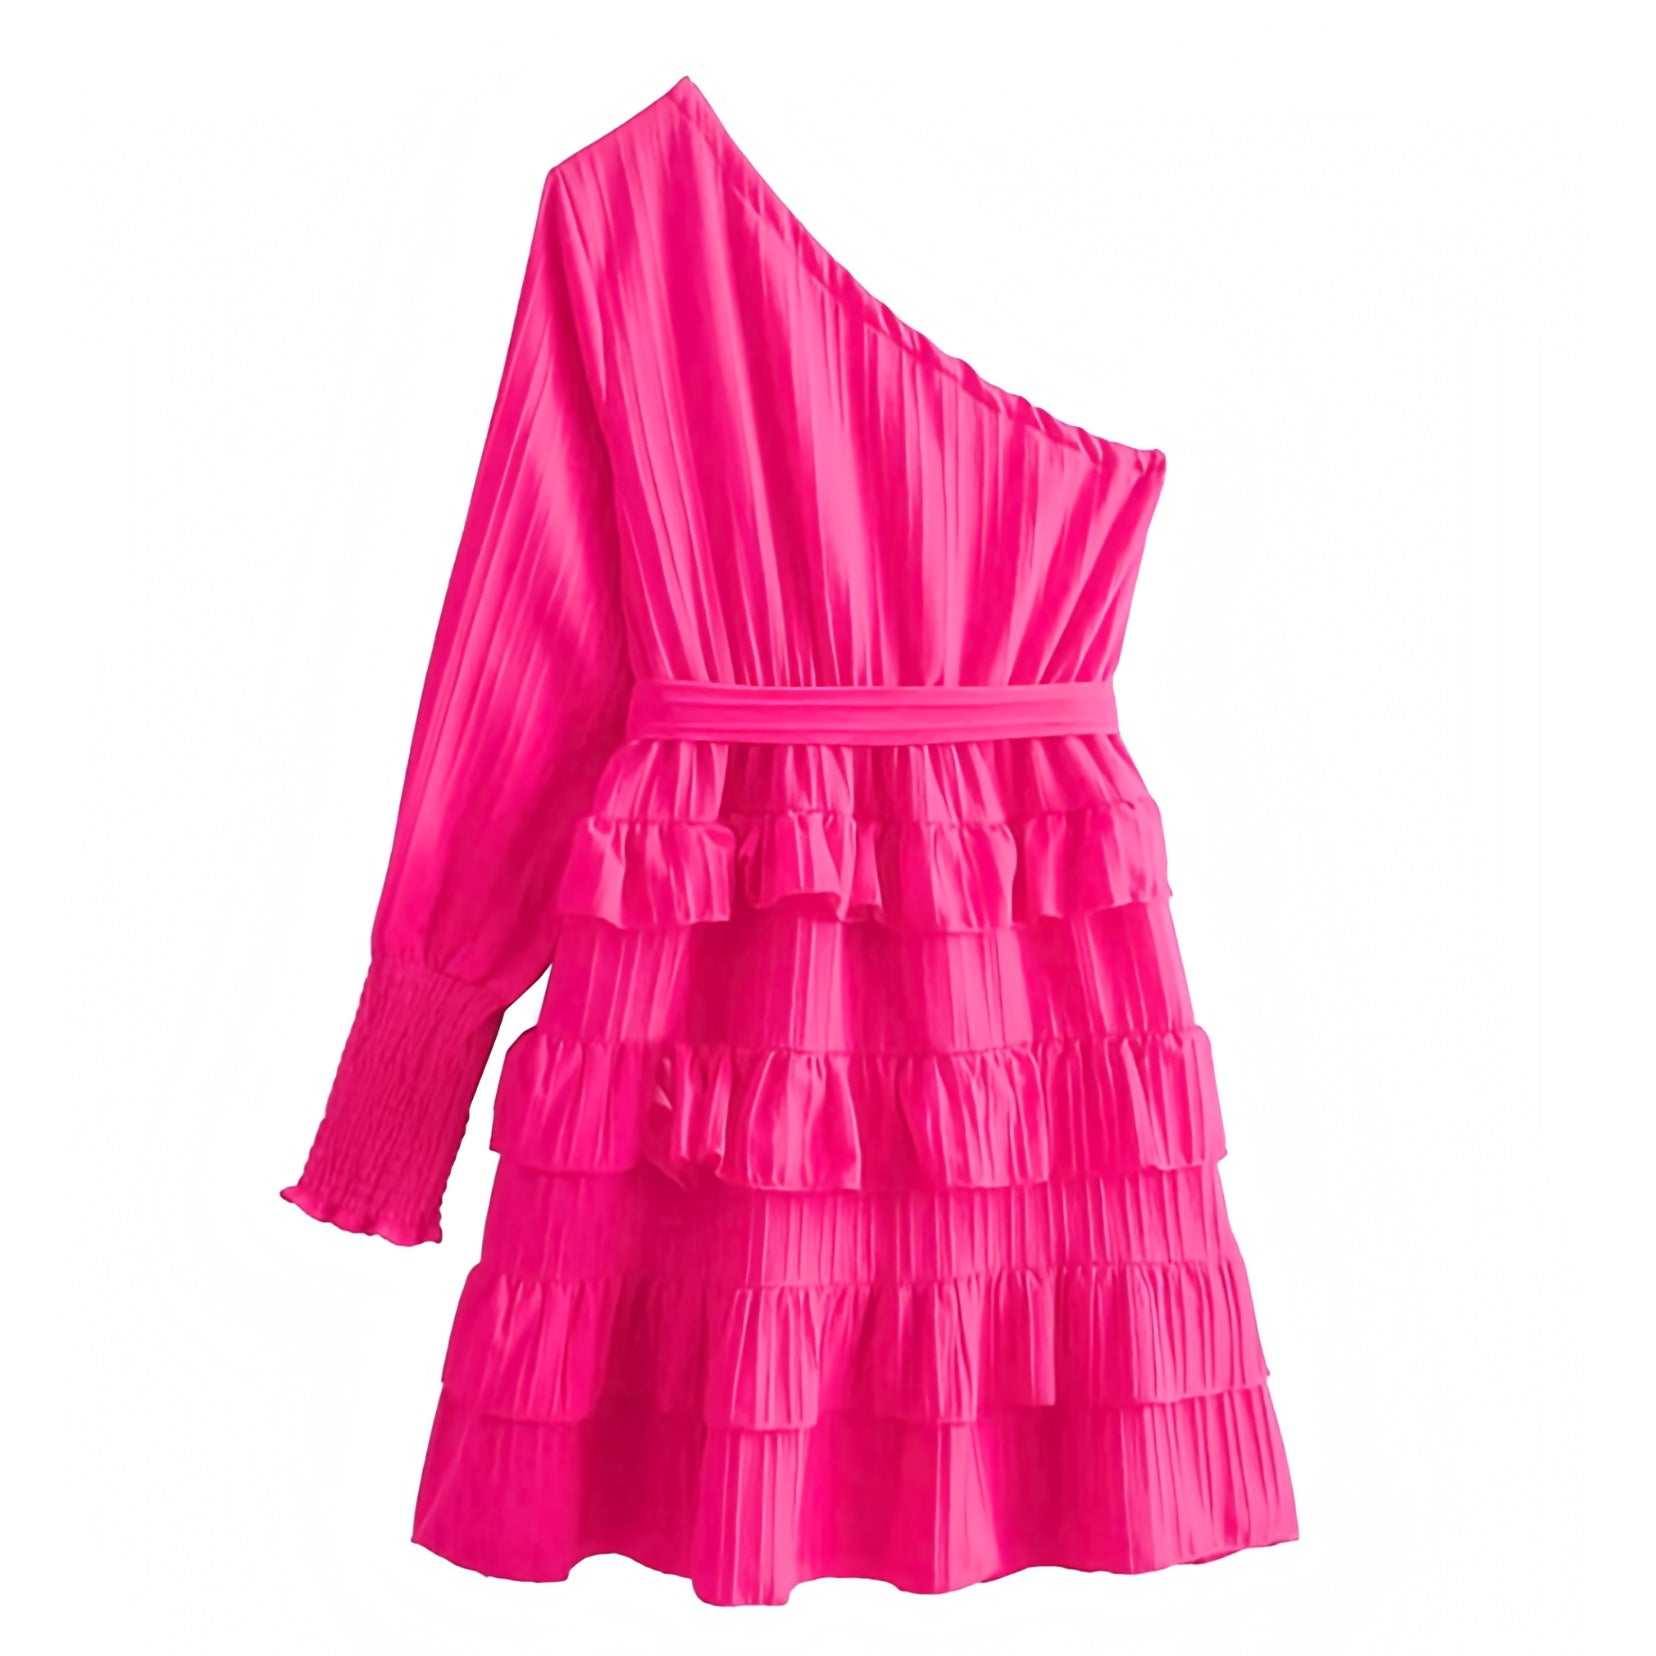 hot-pink-slim-fit-bodycon-fitted-bodice-drop-waist-layered-ruffle-trim-gathered-ruched-bow-belt-long-sleeve-off-one-shoulder-asymmetric-tiered-flowy-boho-bohemian-short-mini-dress-gown-women-ladies-teens-tweens-chic-trendy-spring-2024-summer-elegant-casual-semi-formal-feminine-preppy-style-prom-homecoming-hoco-dance-party-wedding-guest-beach-vacation-sundress-dresses-altard-state-loveshackfancy-revolve-zara-aritzia-reformation-dupe